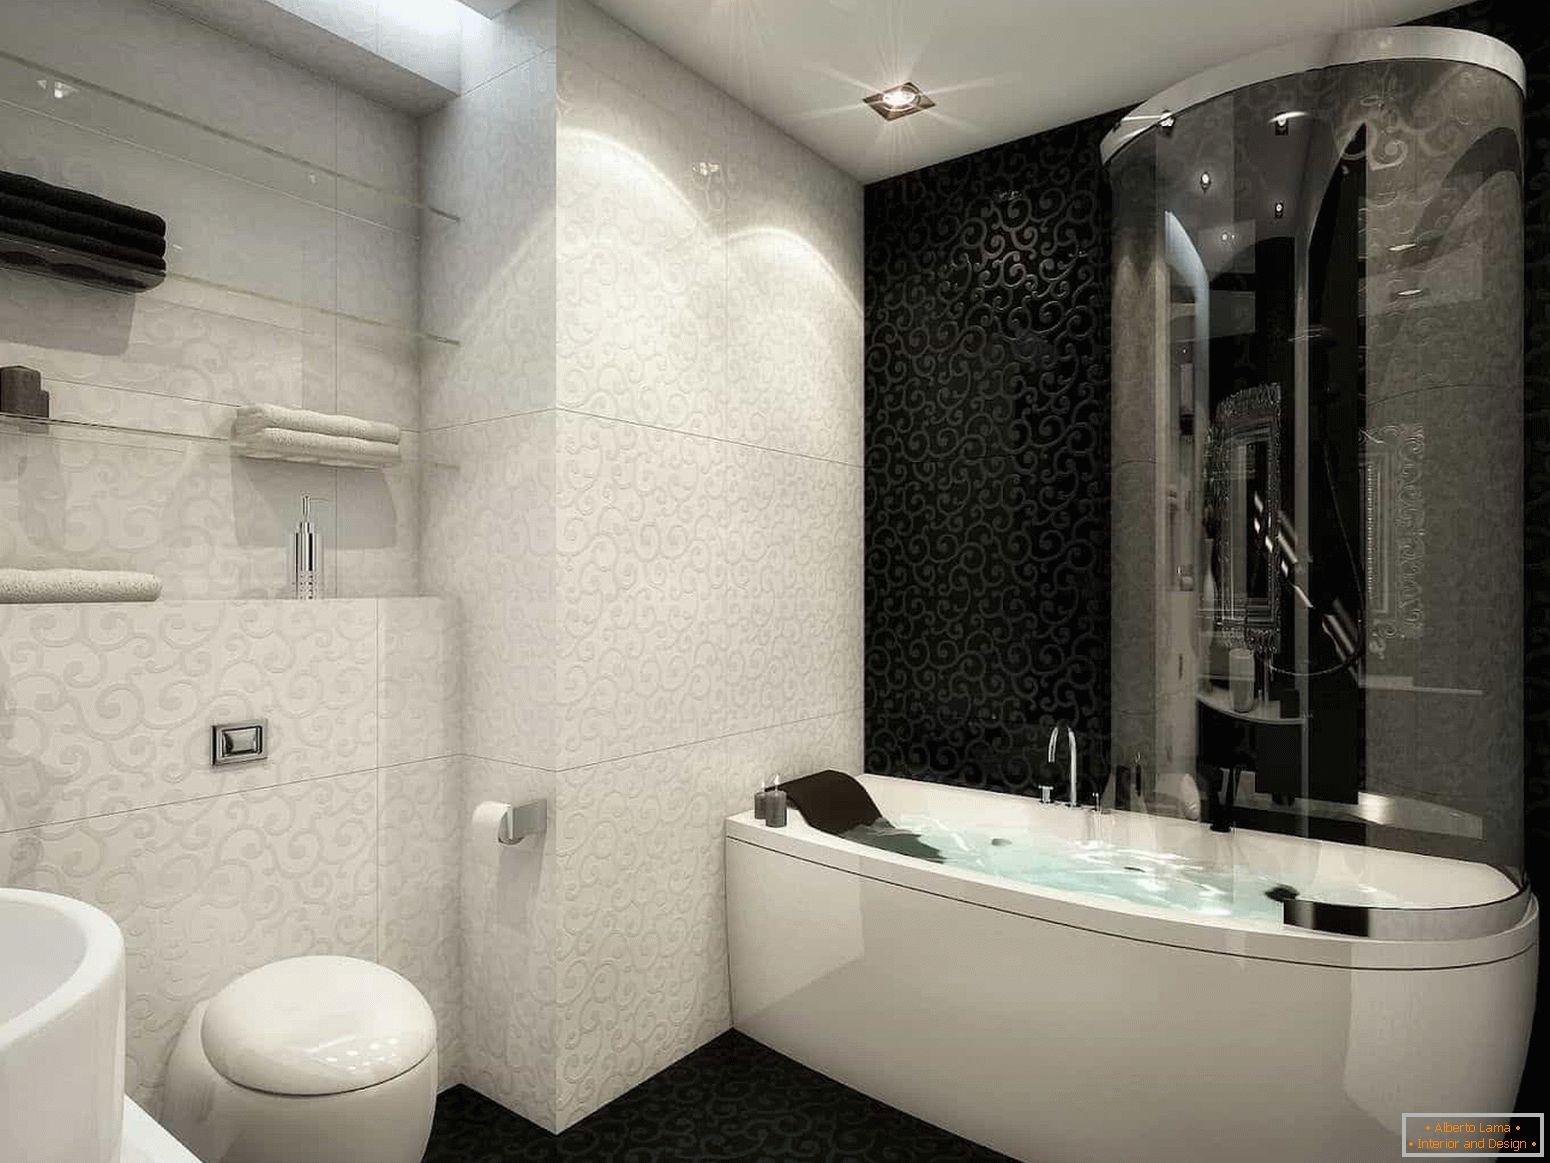 The combination of white and black tiles in the bathroom